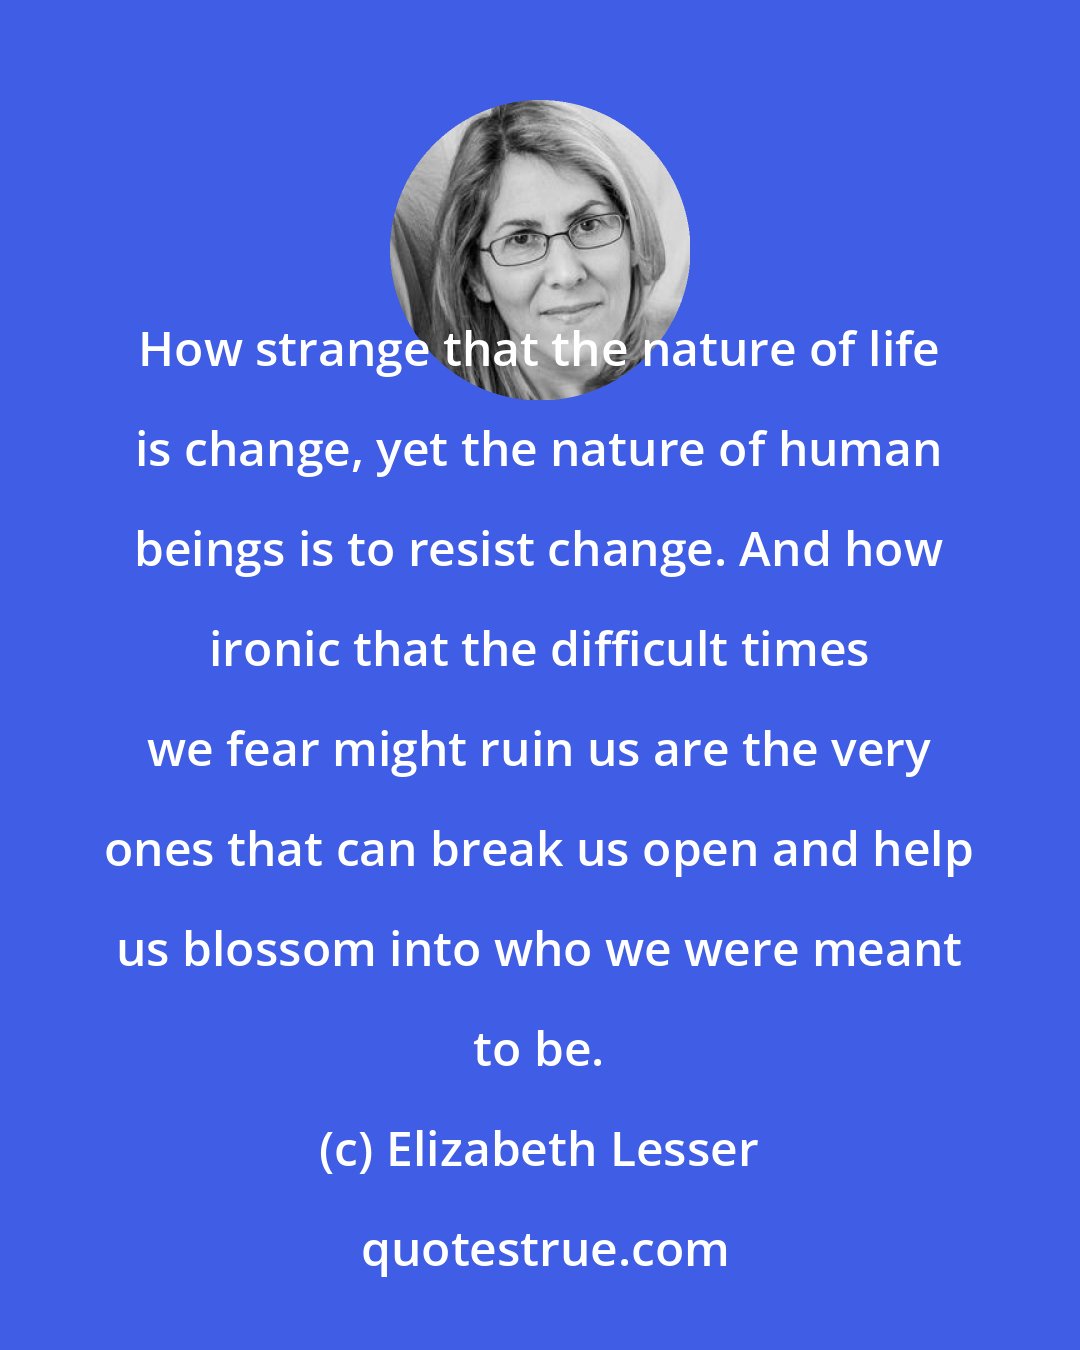 Elizabeth Lesser: How strange that the nature of life is change, yet the nature of human beings is to resist change. And how ironic that the difficult times we fear might ruin us are the very ones that can break us open and help us blossom into who we were meant to be.